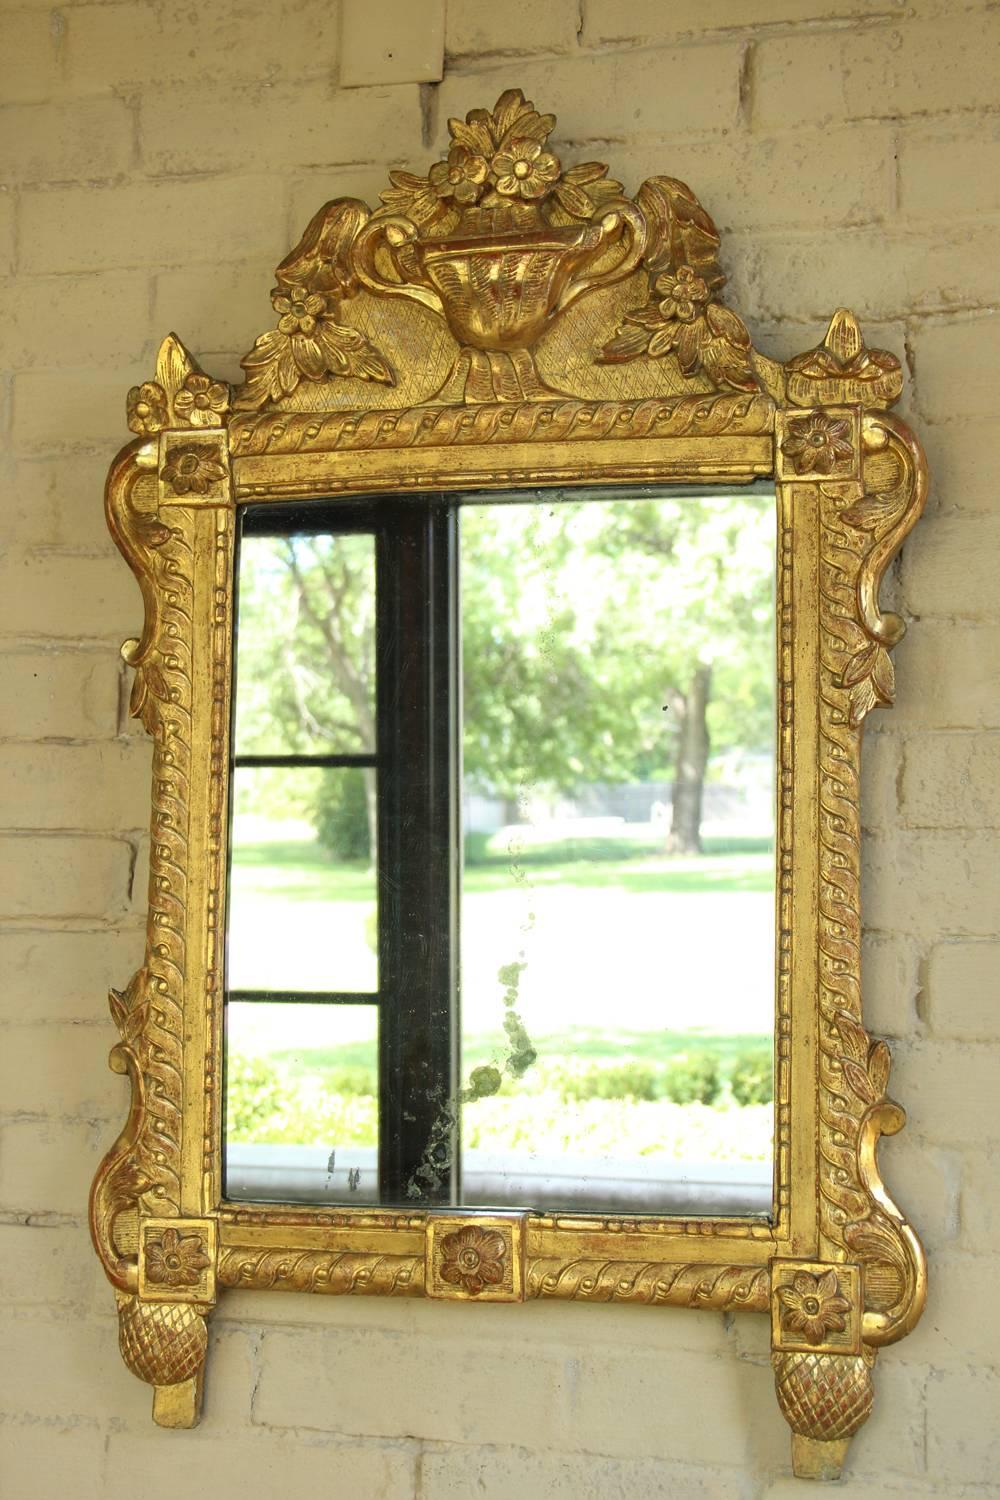 A richly carved 18th century French Louis Seize period original giltwood mirror with floral and urn motif and mercury plate. The carved crest features an urn filled with a bouquet of trailing flowers. The floral and leaf motif continues along the